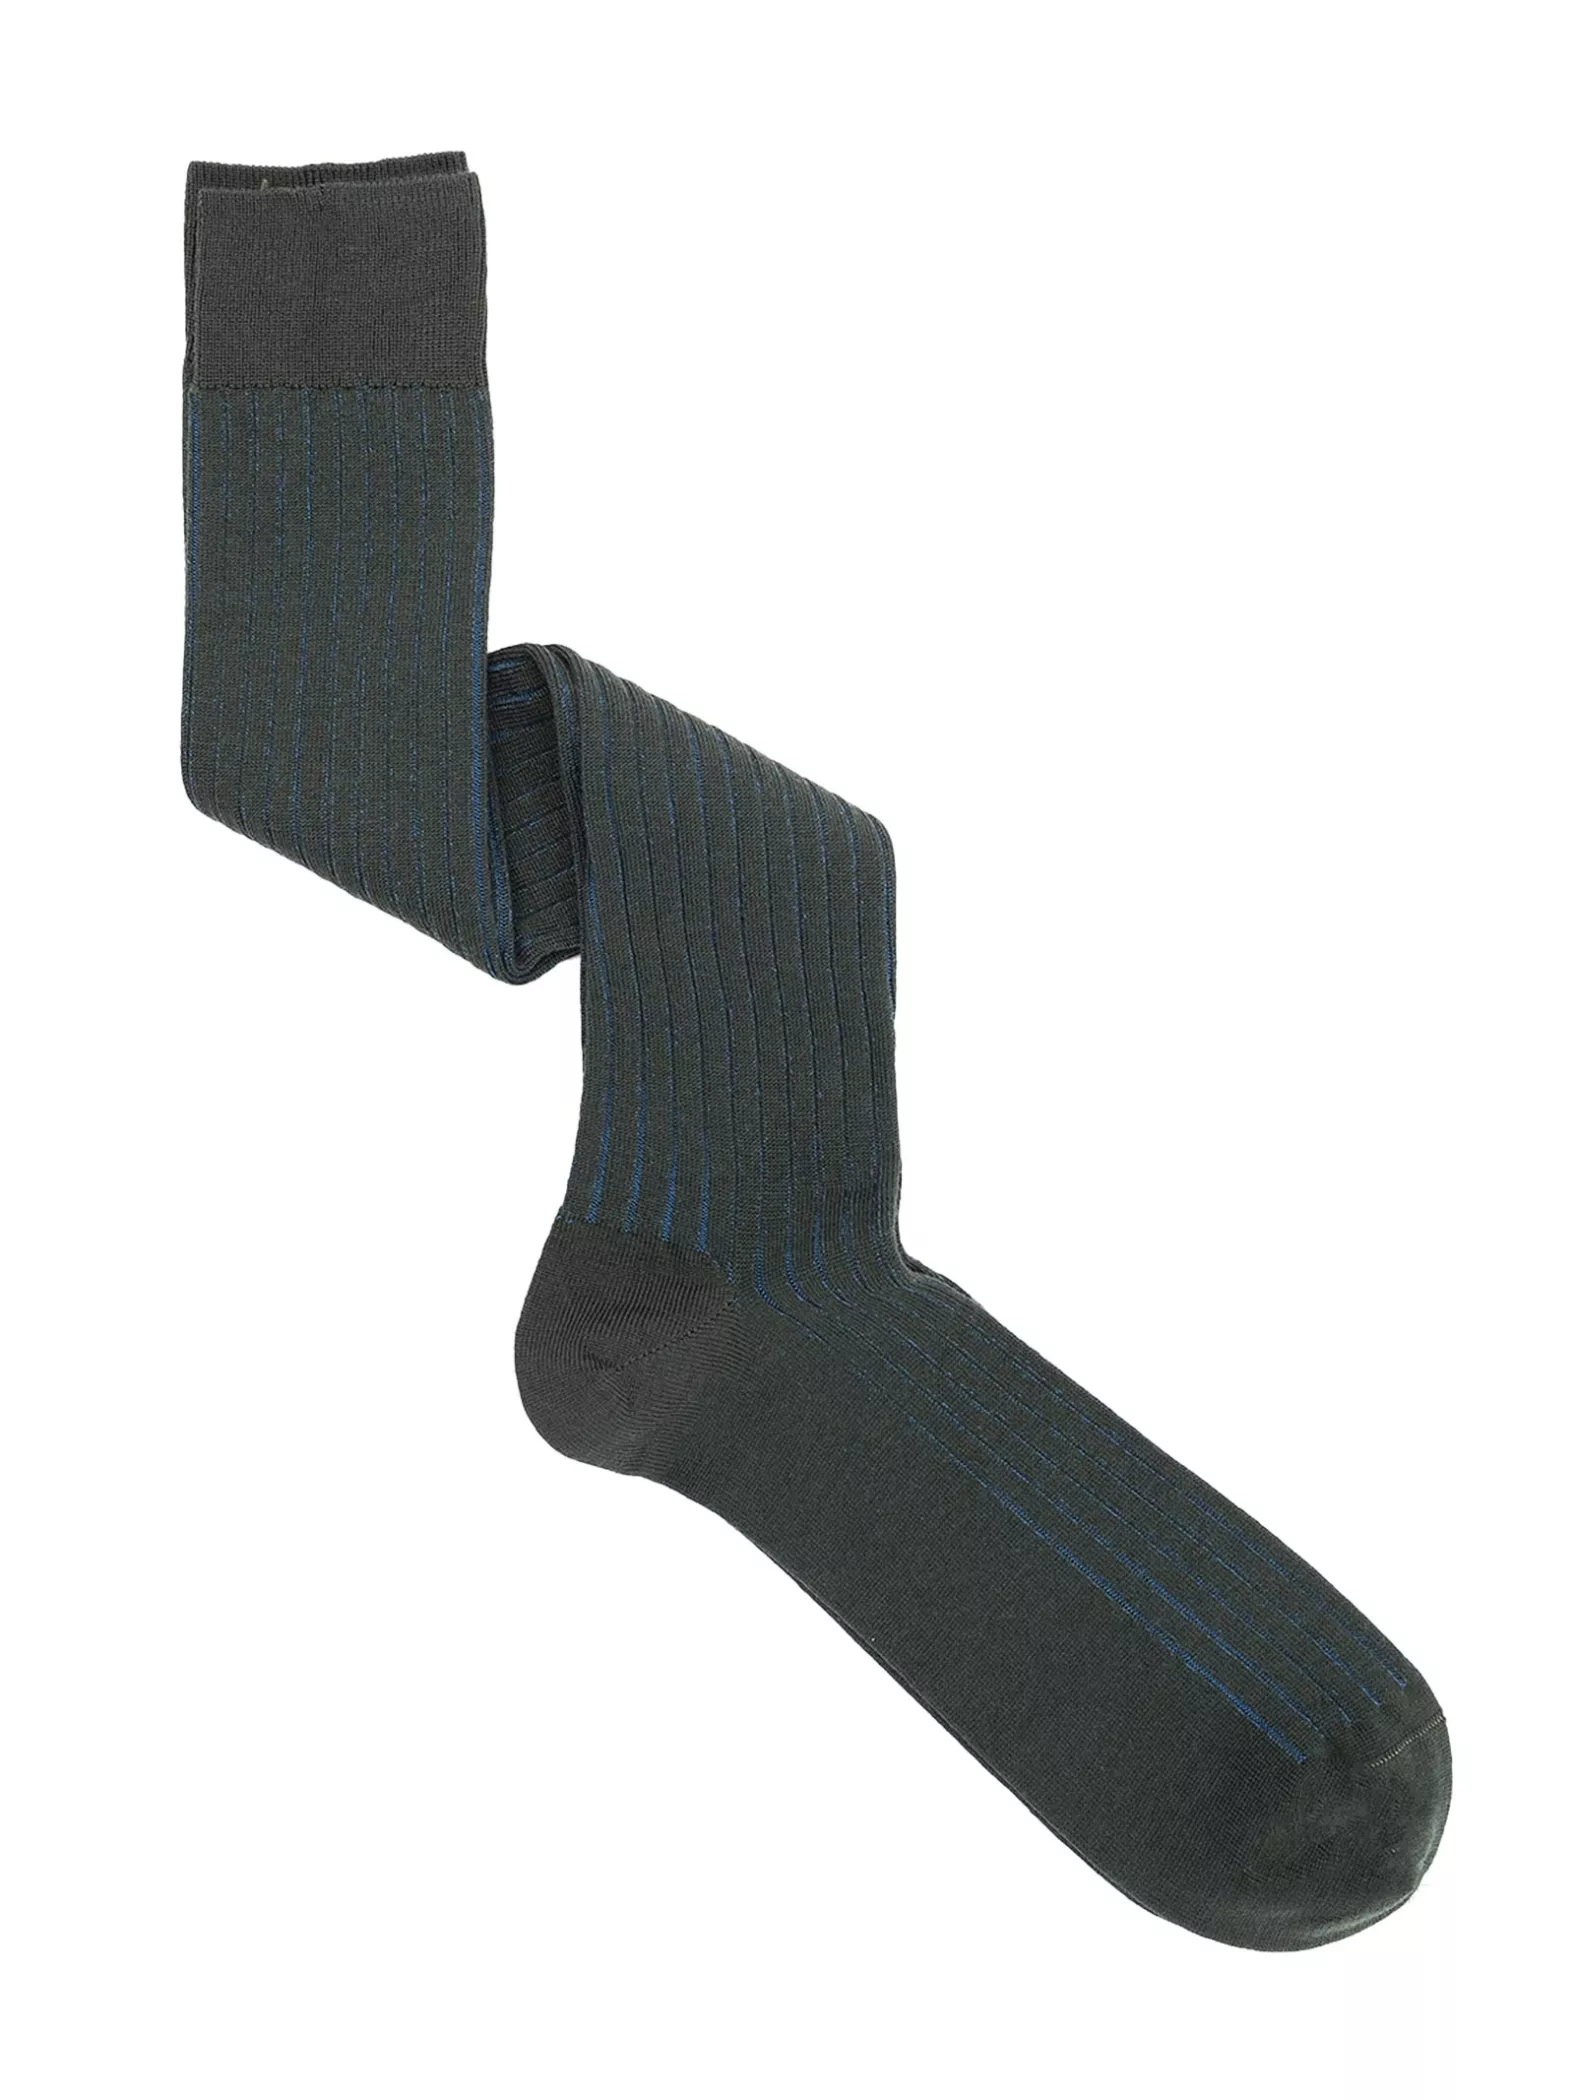 Long socks with classic two-tone ribbed vanisé design in wool